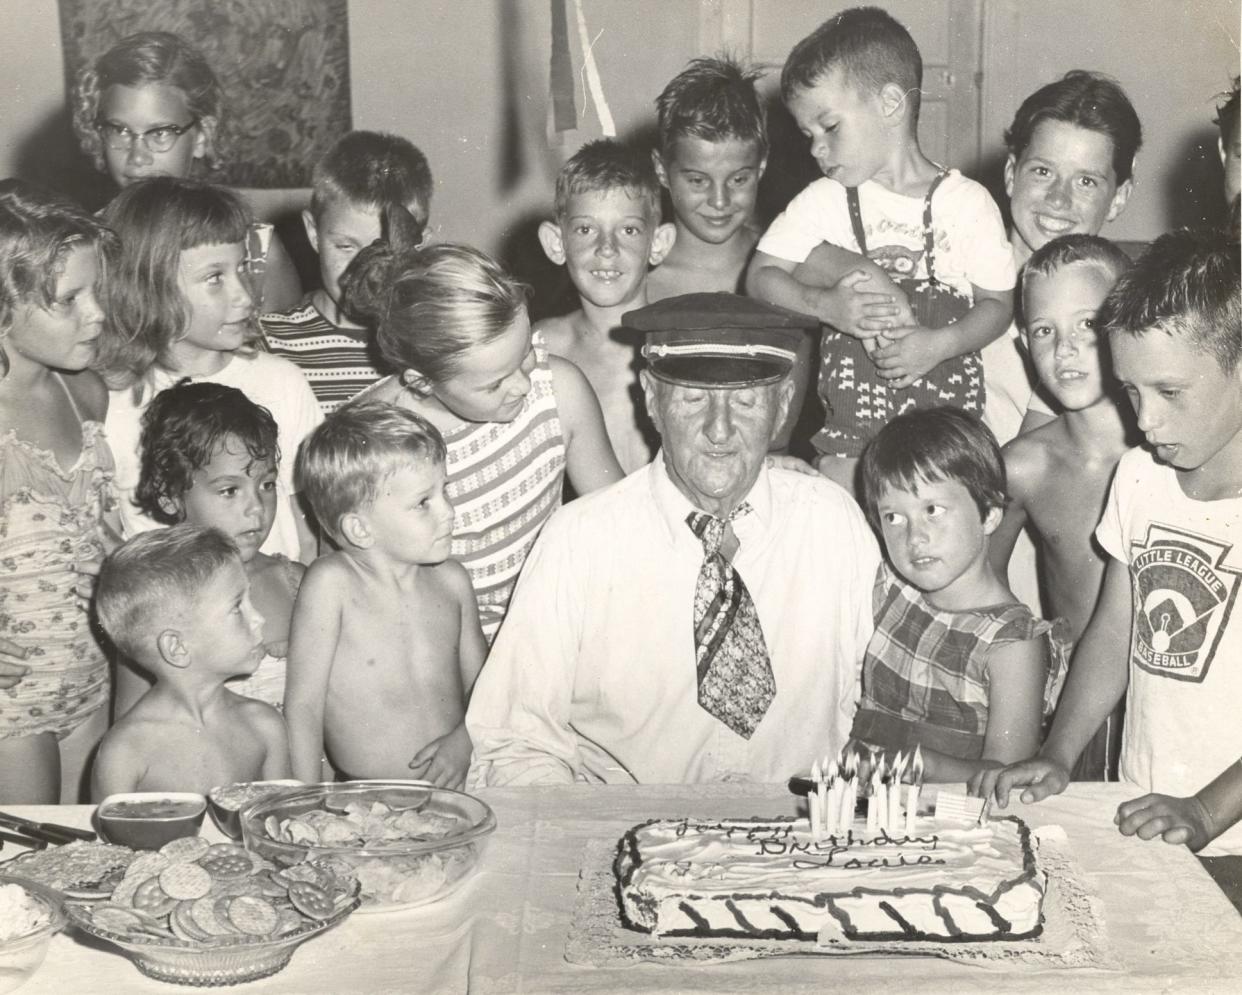 Old Salt Capt. Lou Bartling, born at Bremerhaven, Germany, on July 4, 1865, was the "center of attention at a birthday party when 50 children and 100 adults showered him with gifts at 2 p.m. yesterday. The party was held at the Sandpiper at the ocean beach. The Sandpiper furnished cake and refreshments, and Captain Bartling received many gifts of clothing, money, and furnishing for his houseboat home. Tears came to the old man’s eyes as he said, 'This is my first birthday party in my whole life.'"